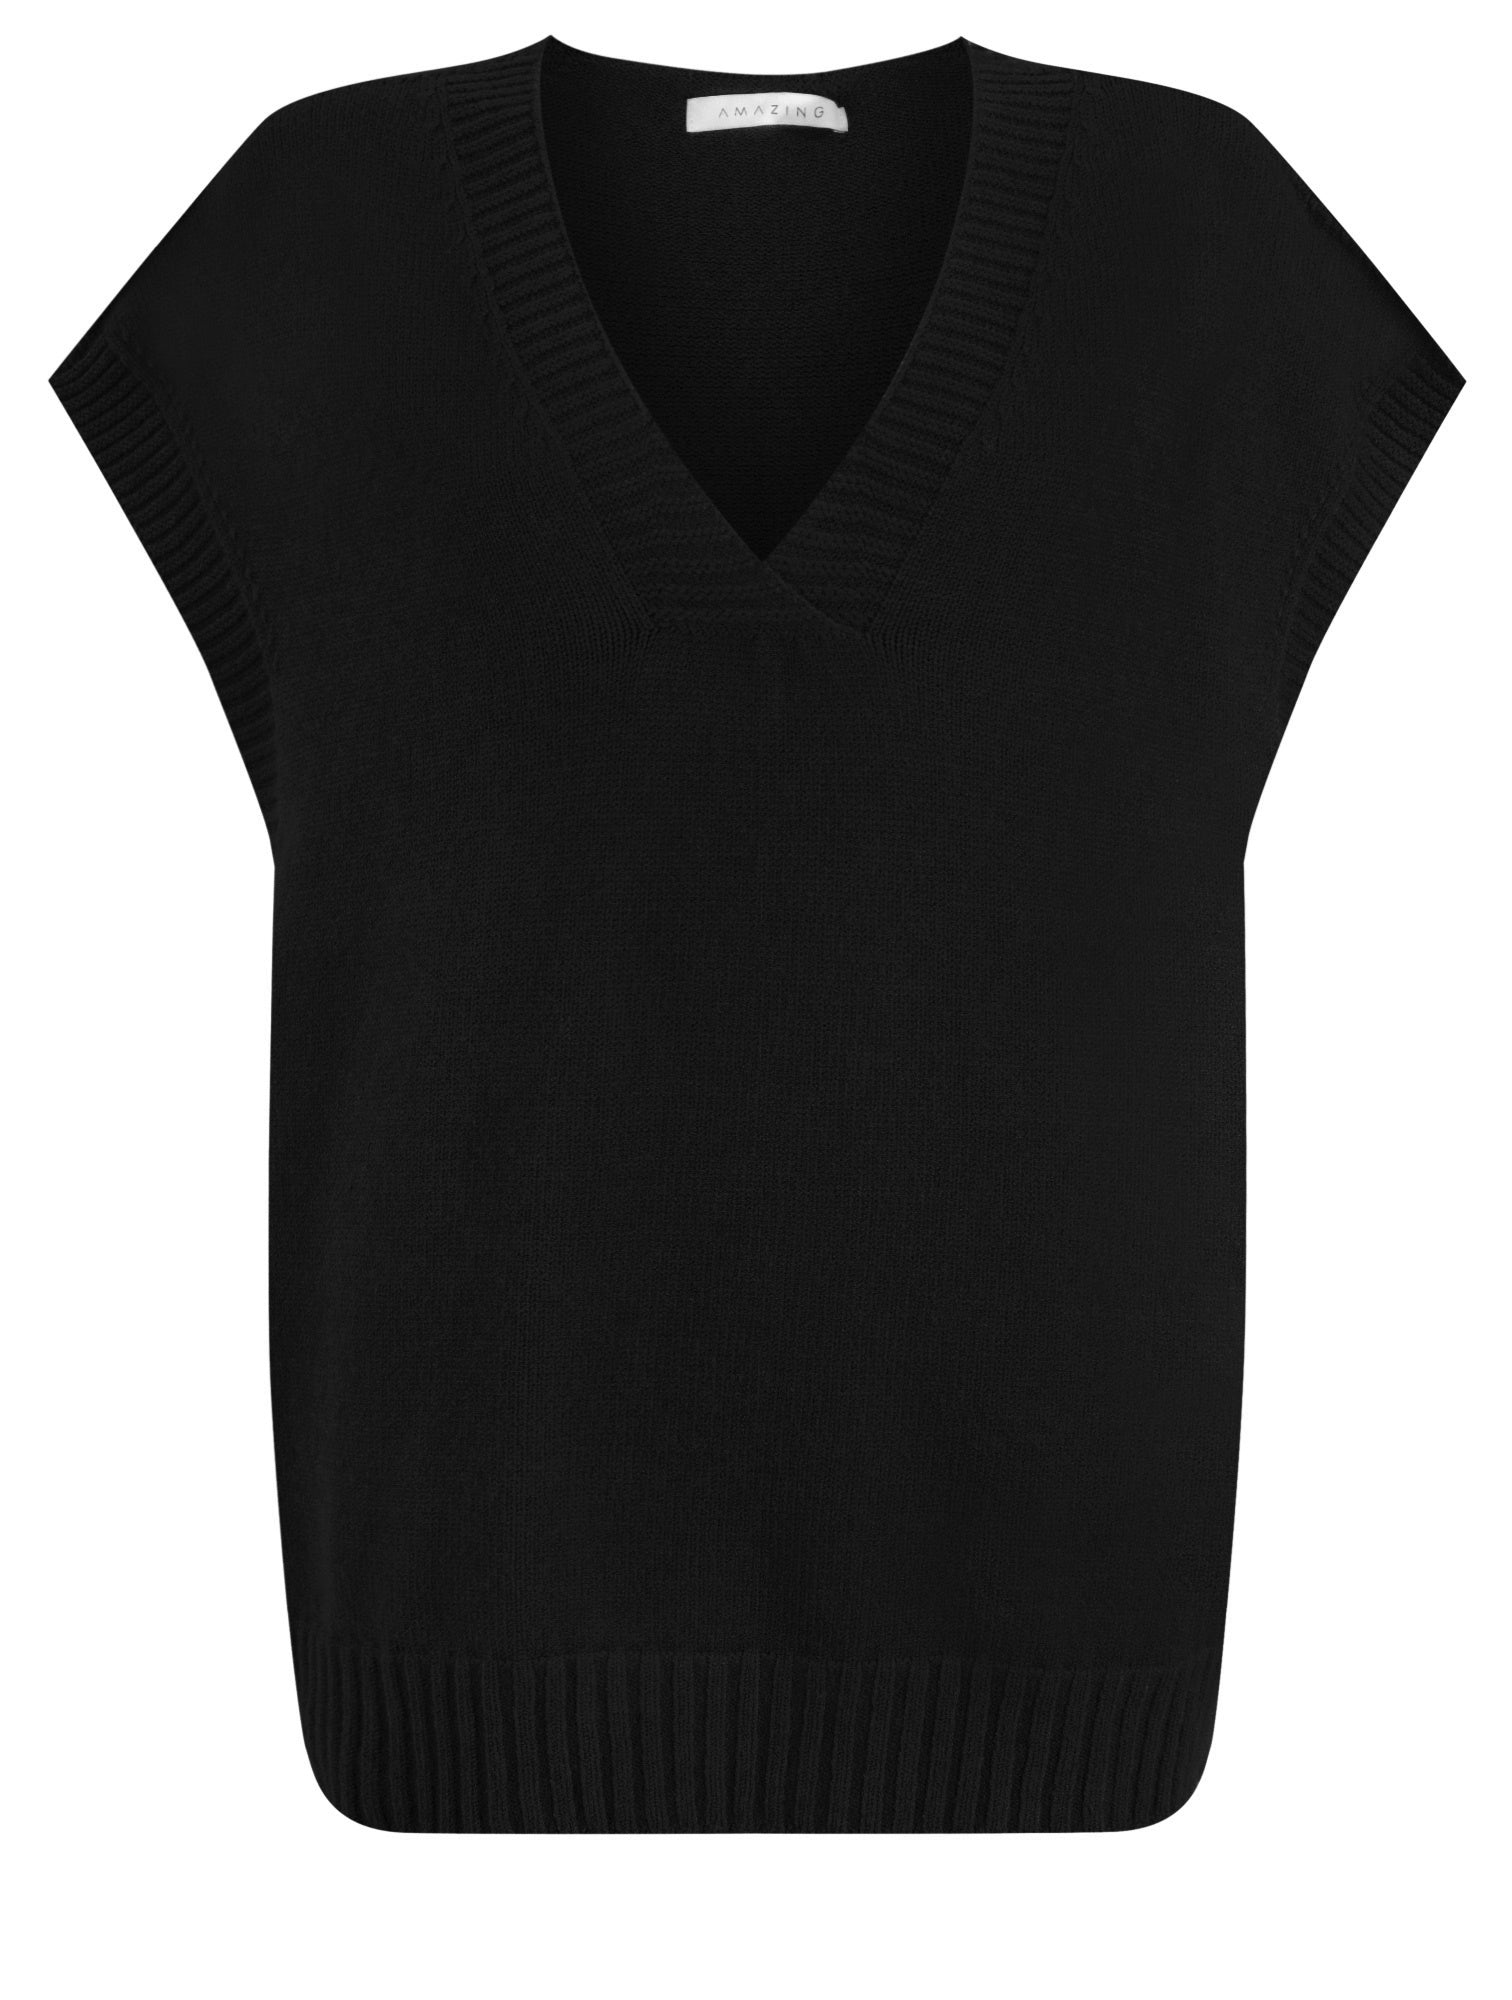 Amazing Woman Pirie V-Neck Easy Fit Tank Top Black.